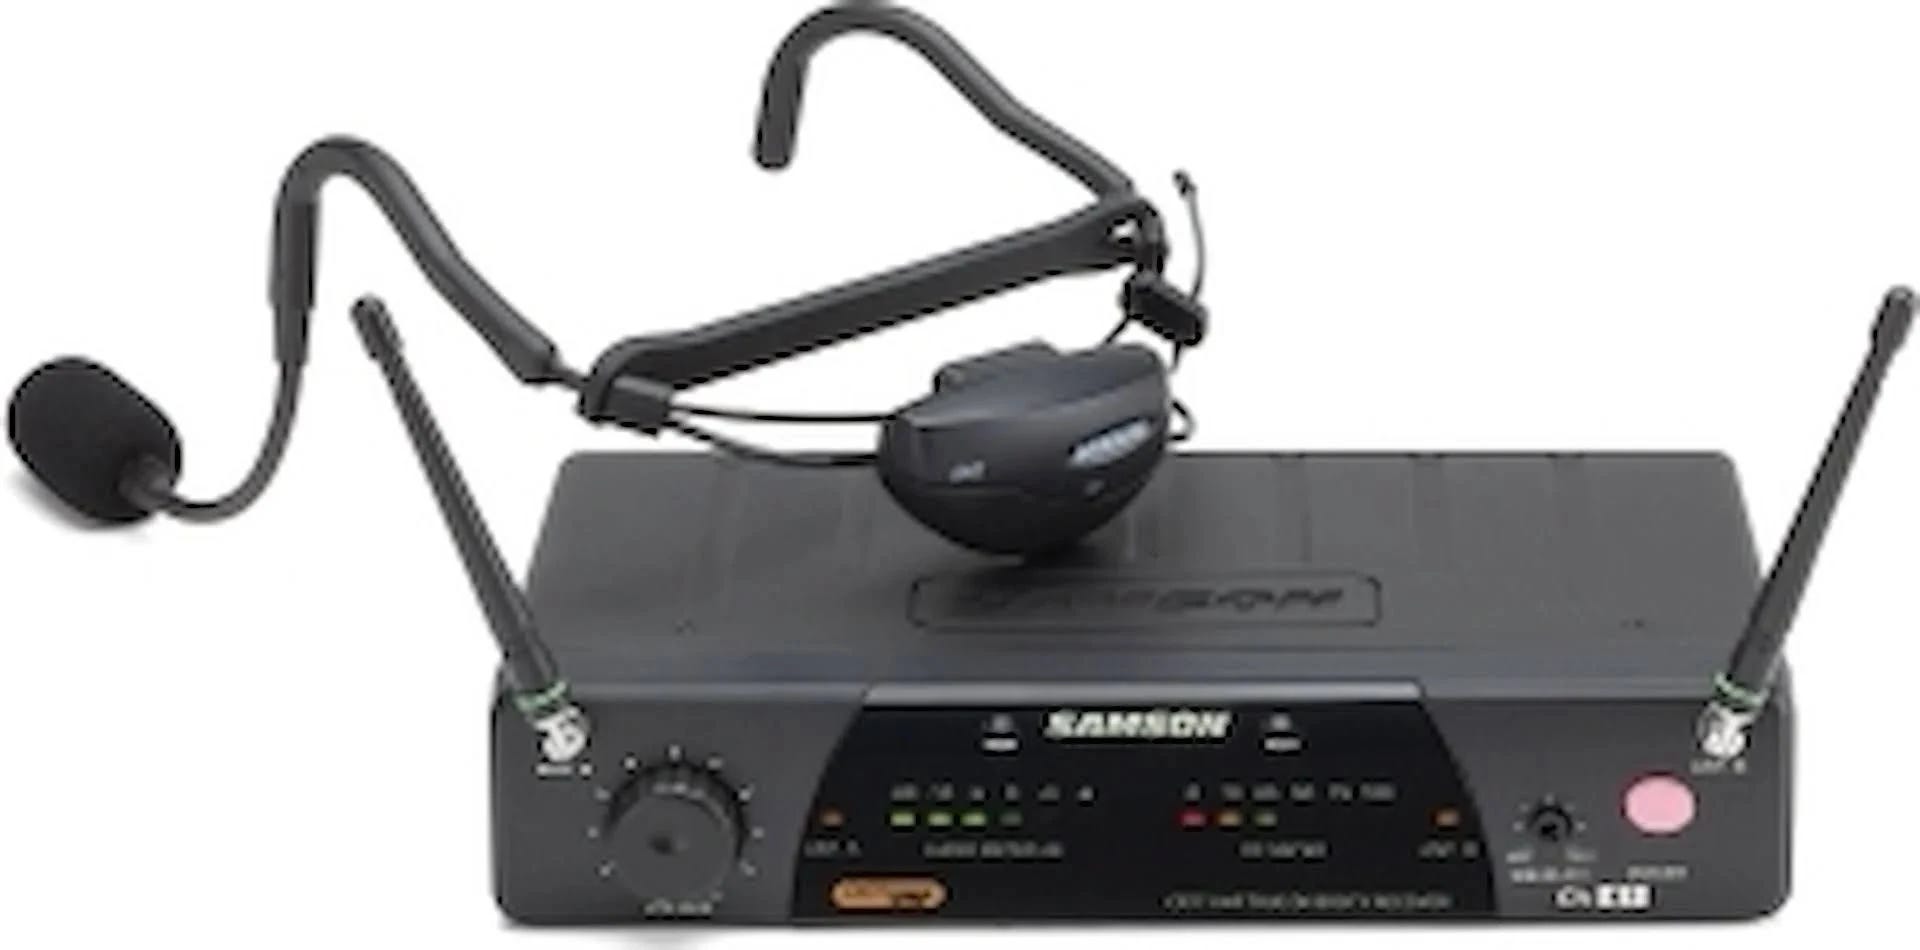 Samson Airline 77 Wireless Fitness Headset Microphone System - K6 for Instructors and Performers | Image